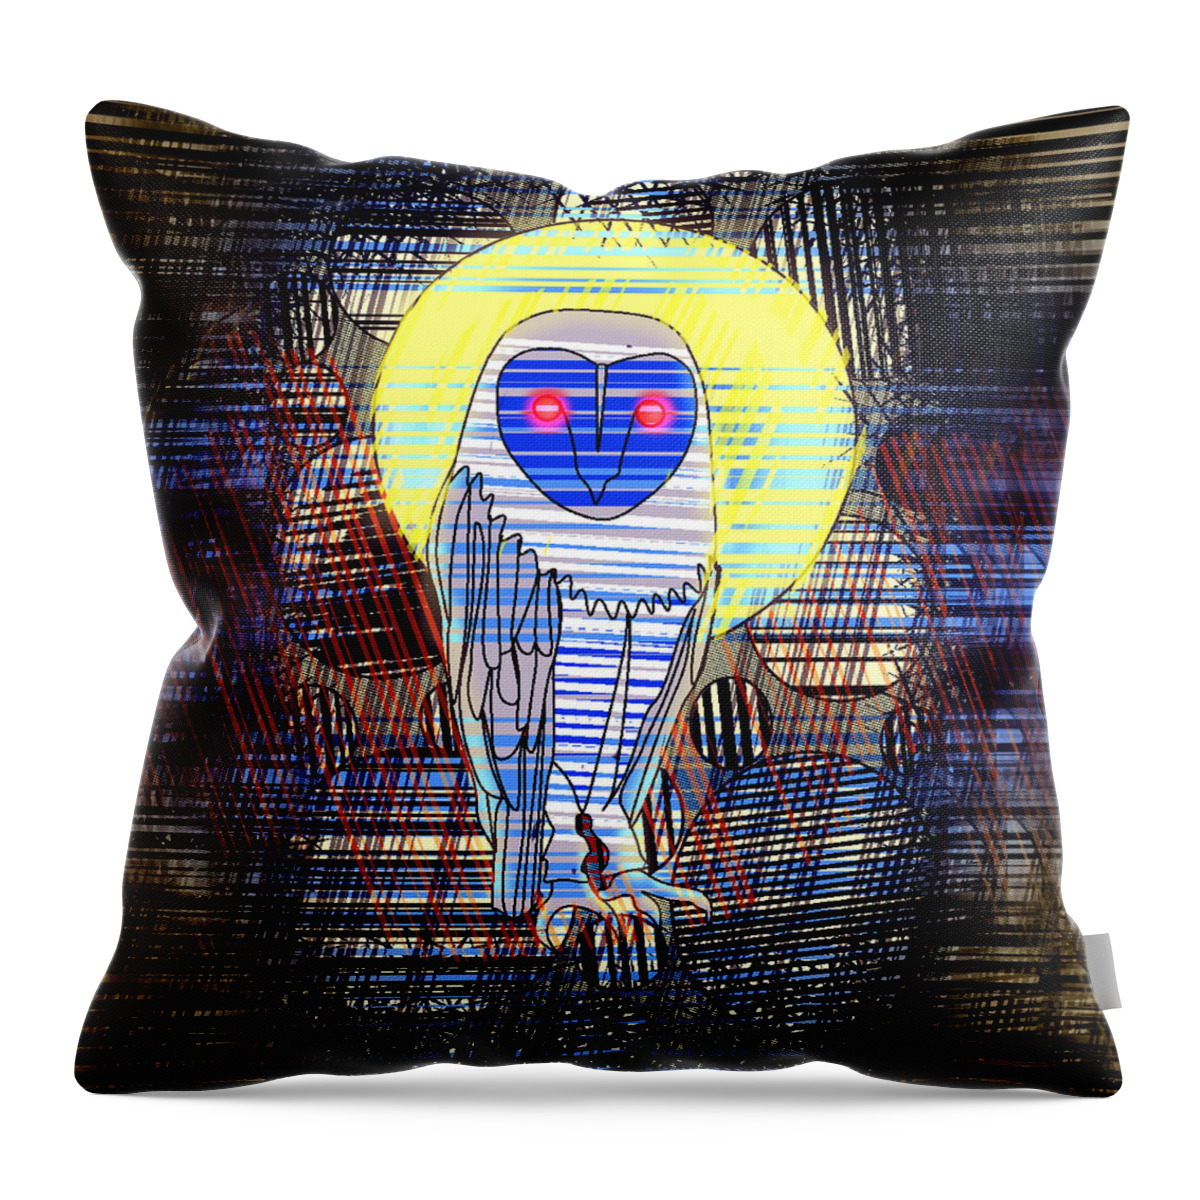 Buho Throw Pillow featuring the digital art Doodle Buho by Rene Lopez